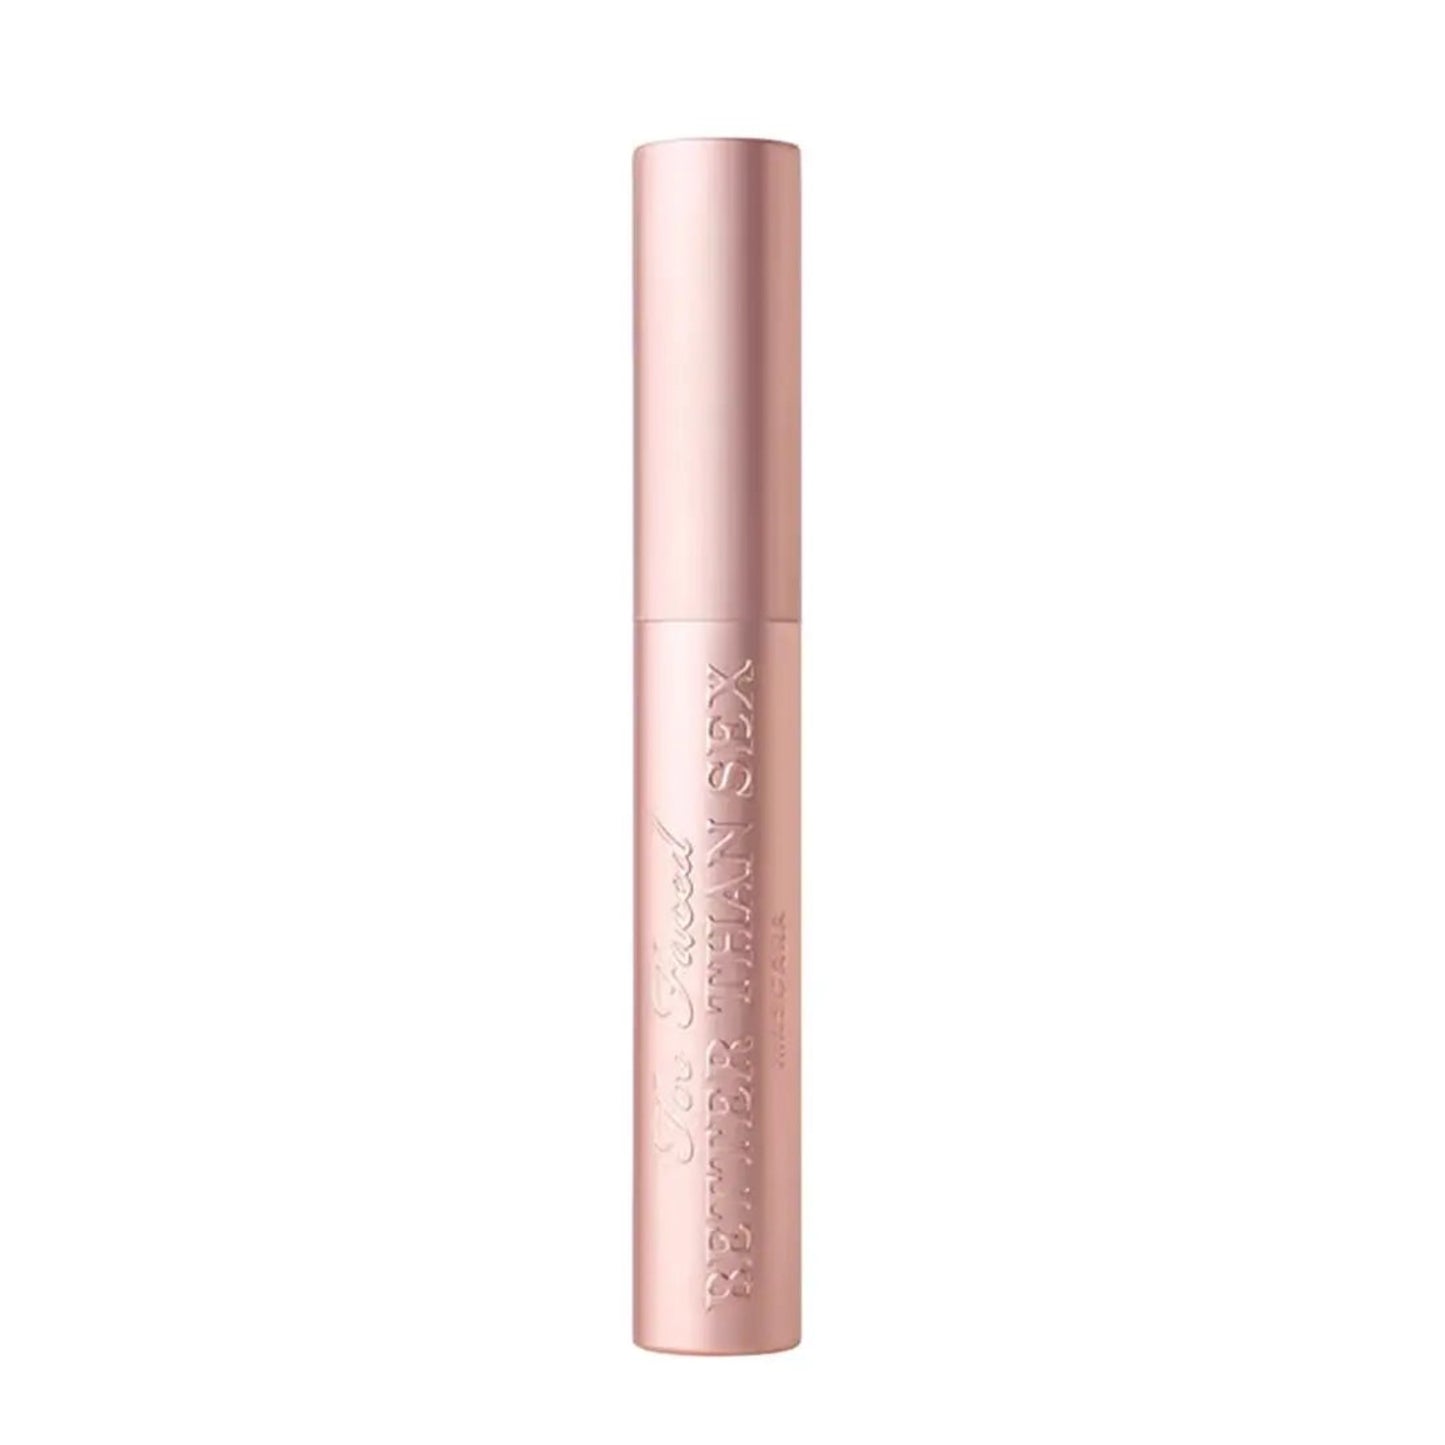 TOO FACED BETTER THAN SEX MASCARA Full Size Too Faced